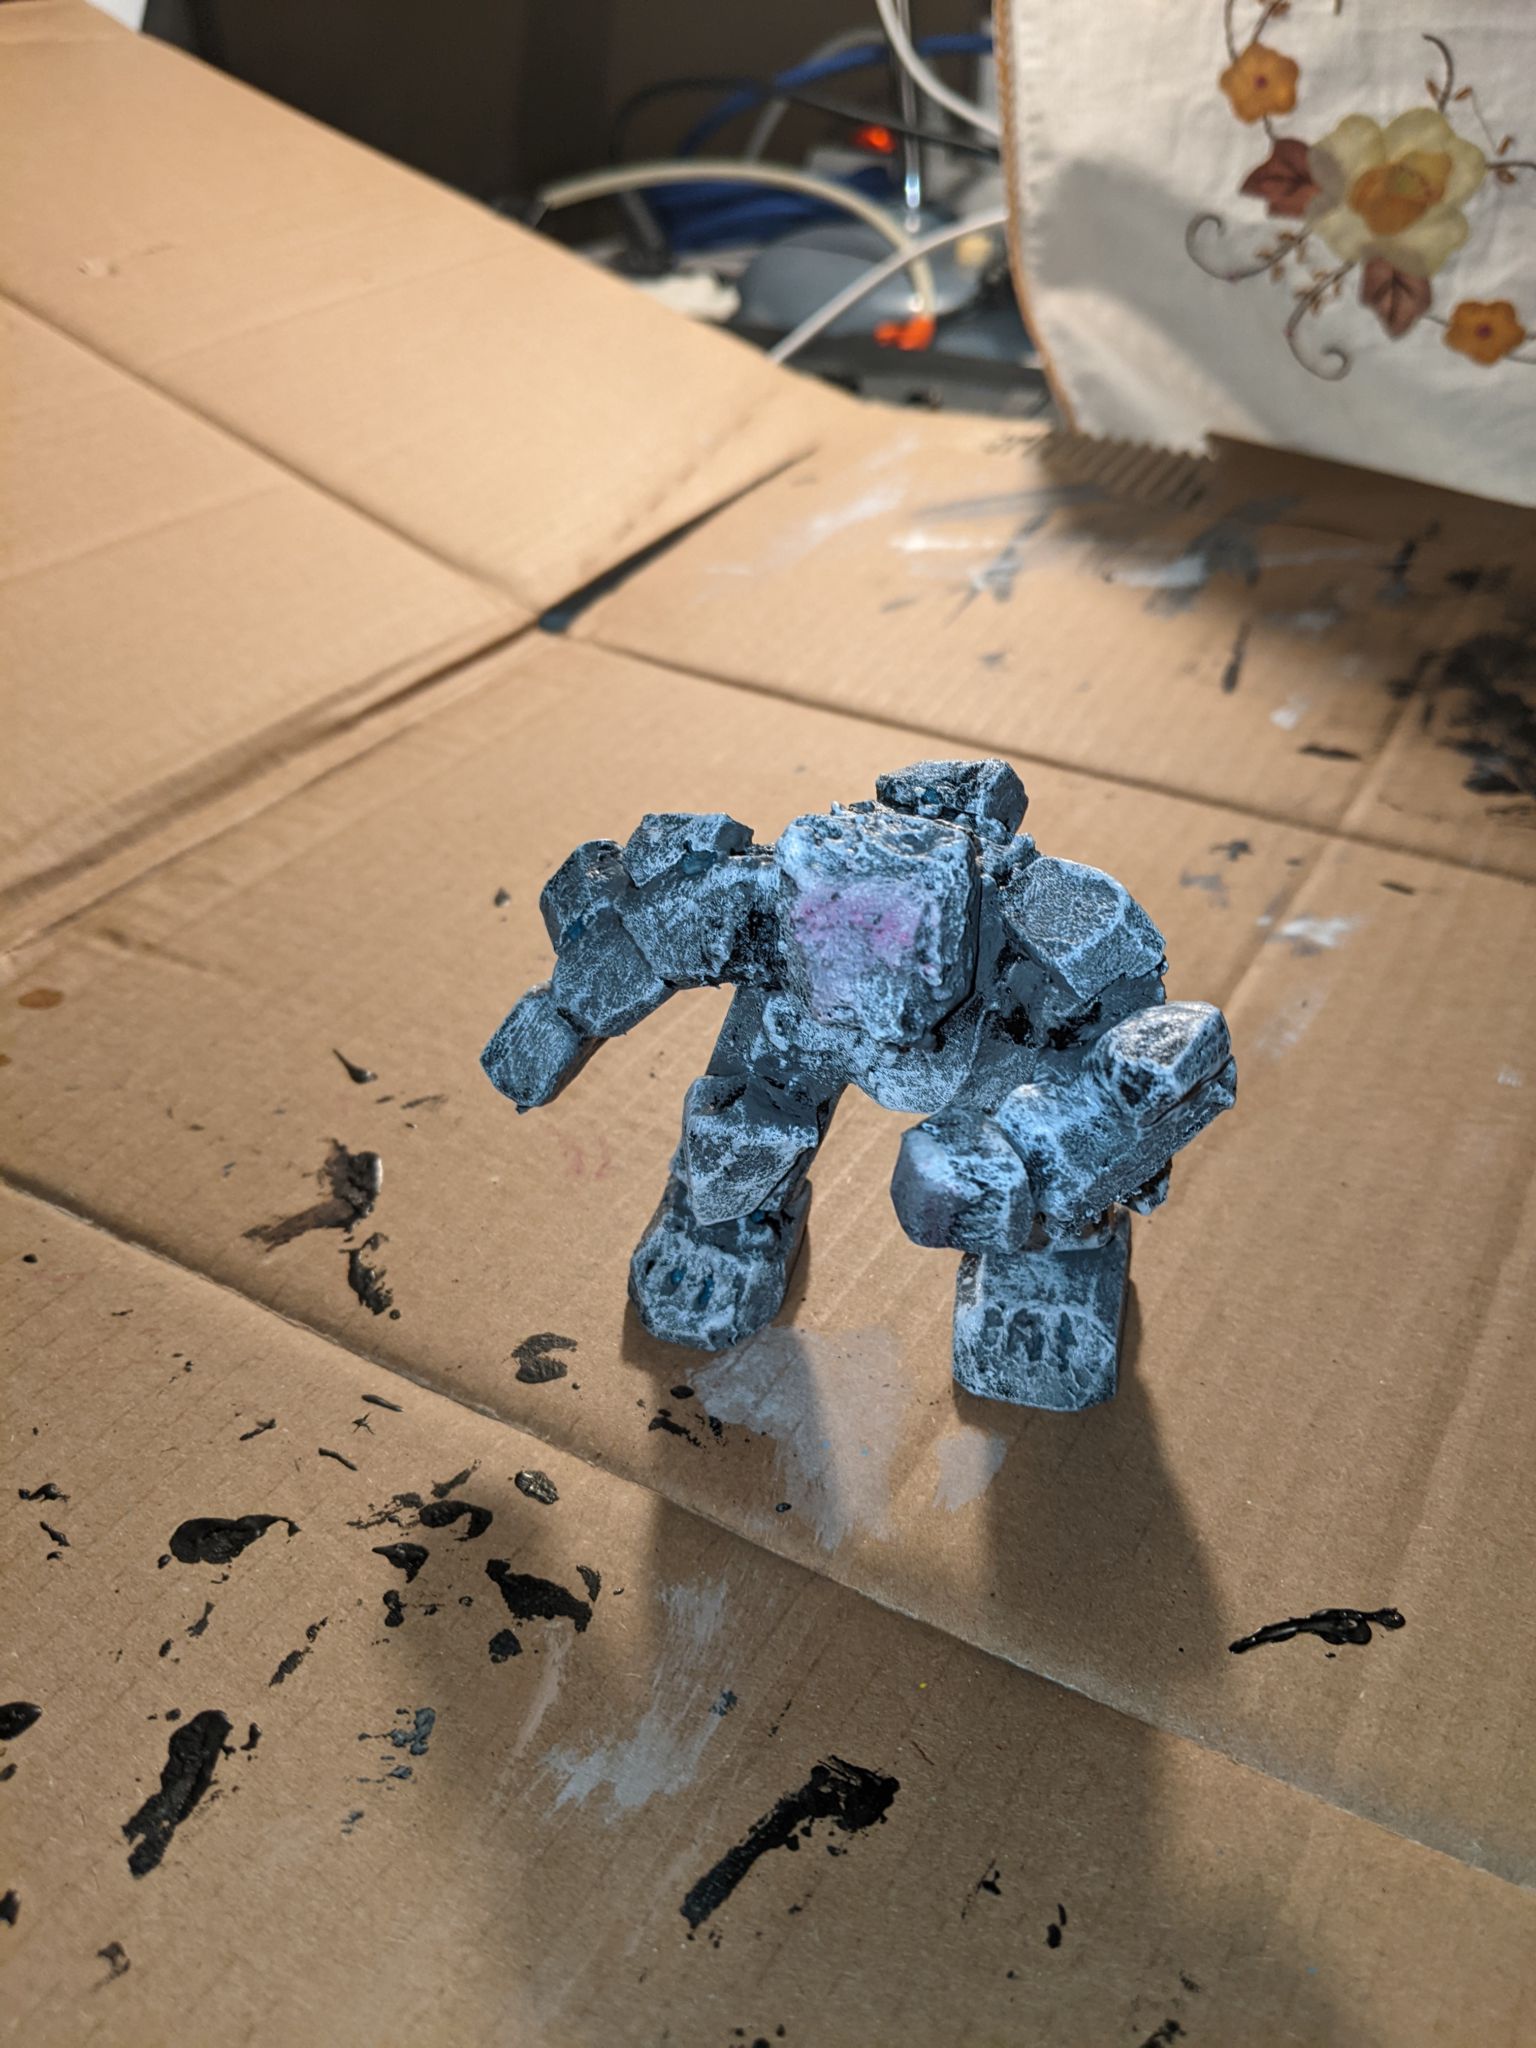 A picture of a painted stone golem build with XPS foam